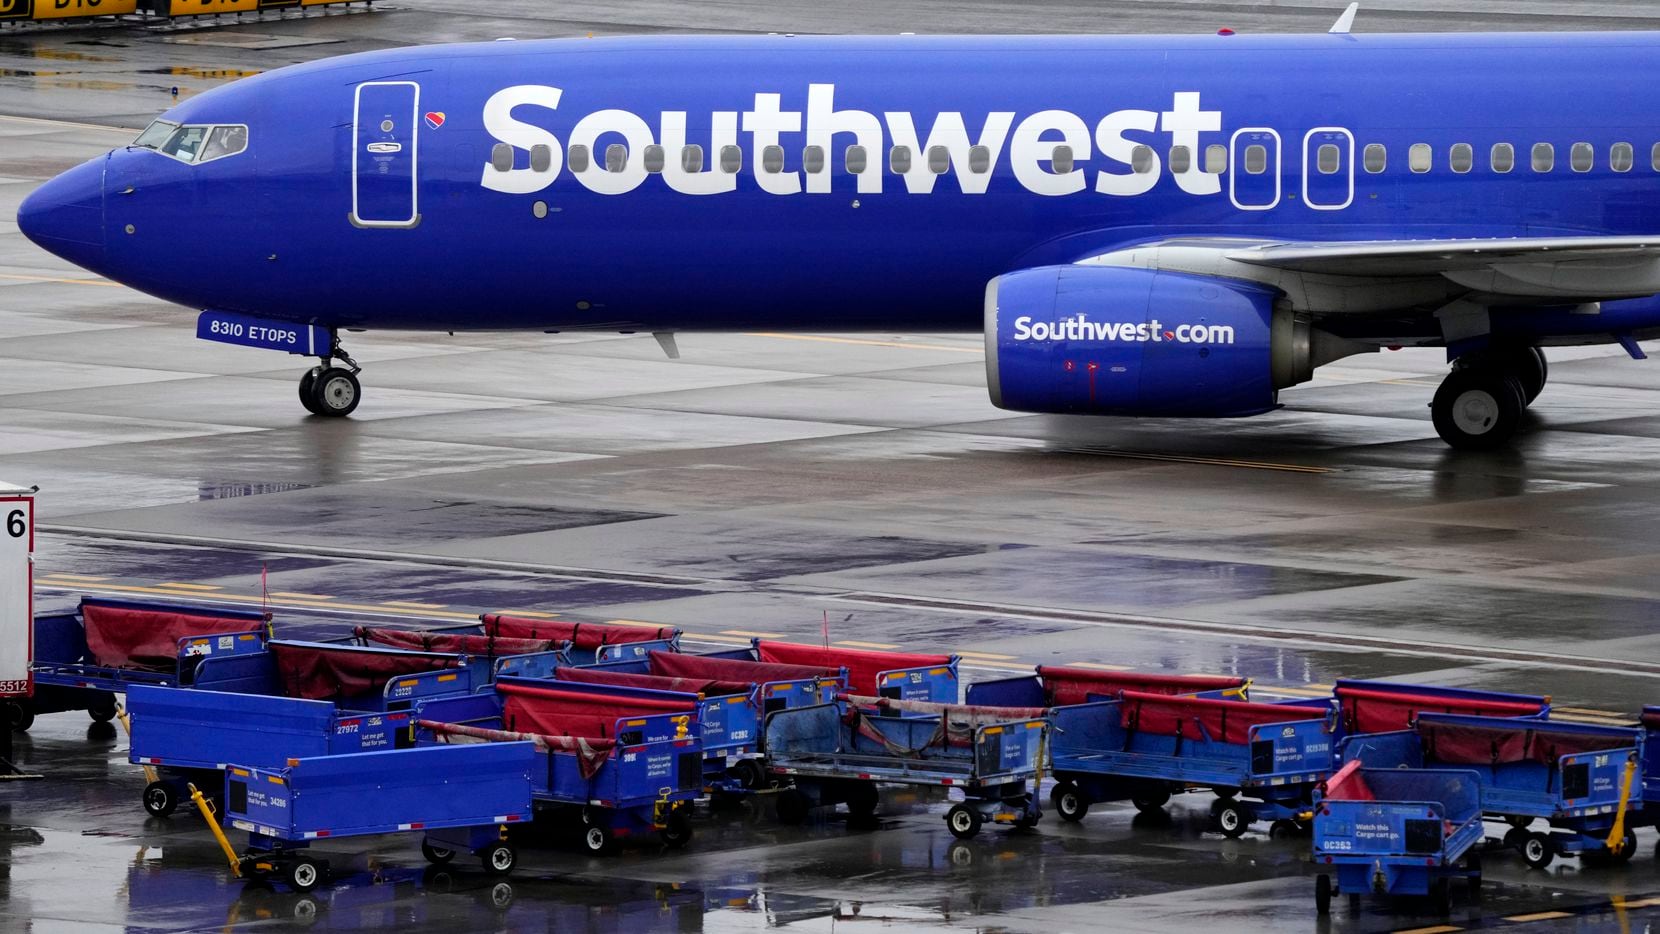 Southwest Airlines spends about $1 billion a year on technology infrastructure and is...